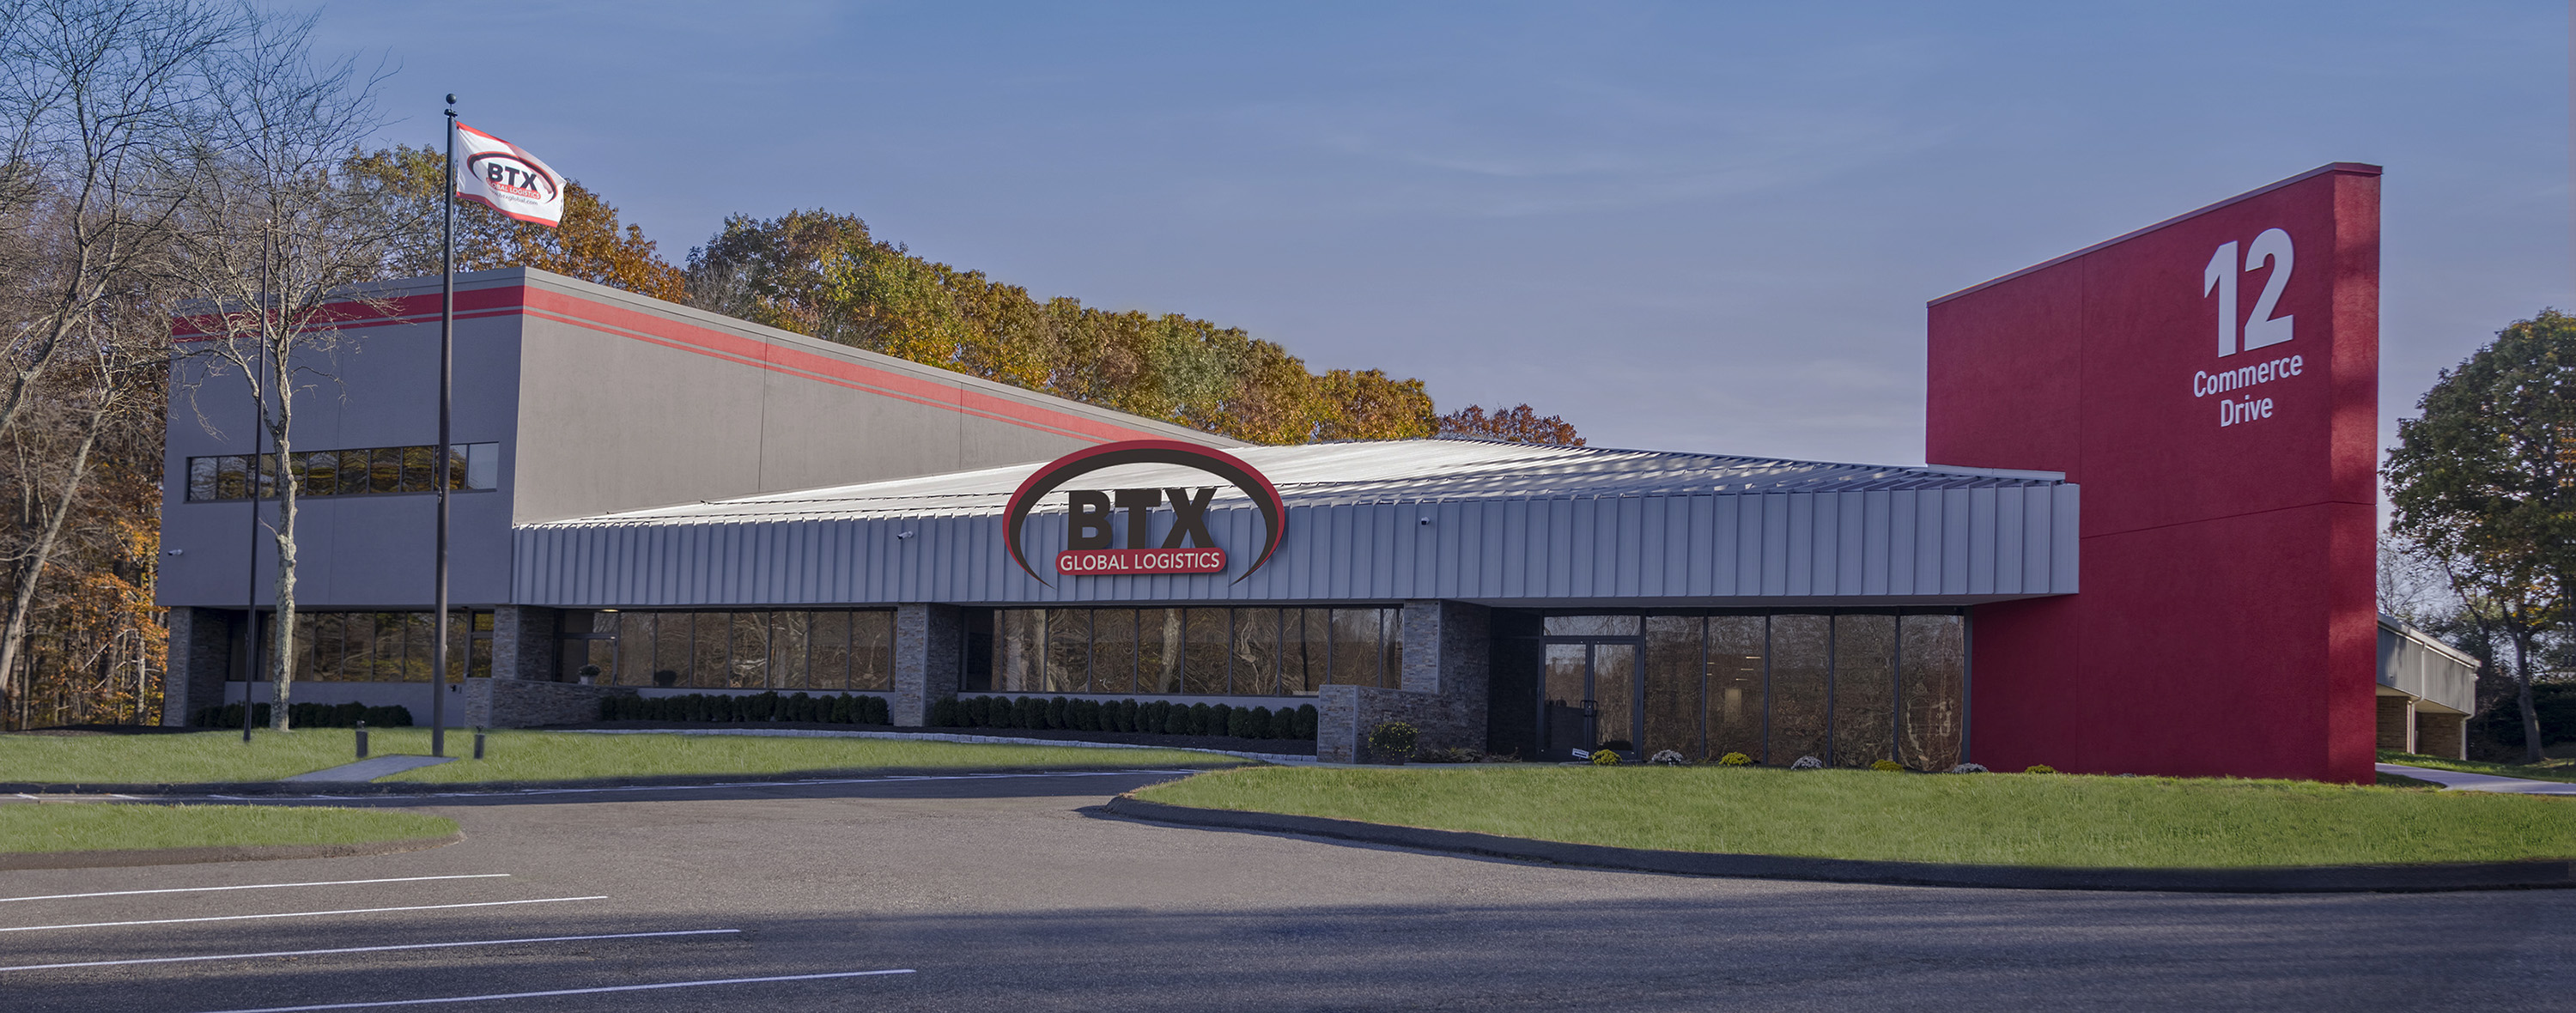 The new 75,000 square-foot BTX Global Logistics headquarters was custom designed to meet the changing demands of the logistics industry and its workforce.